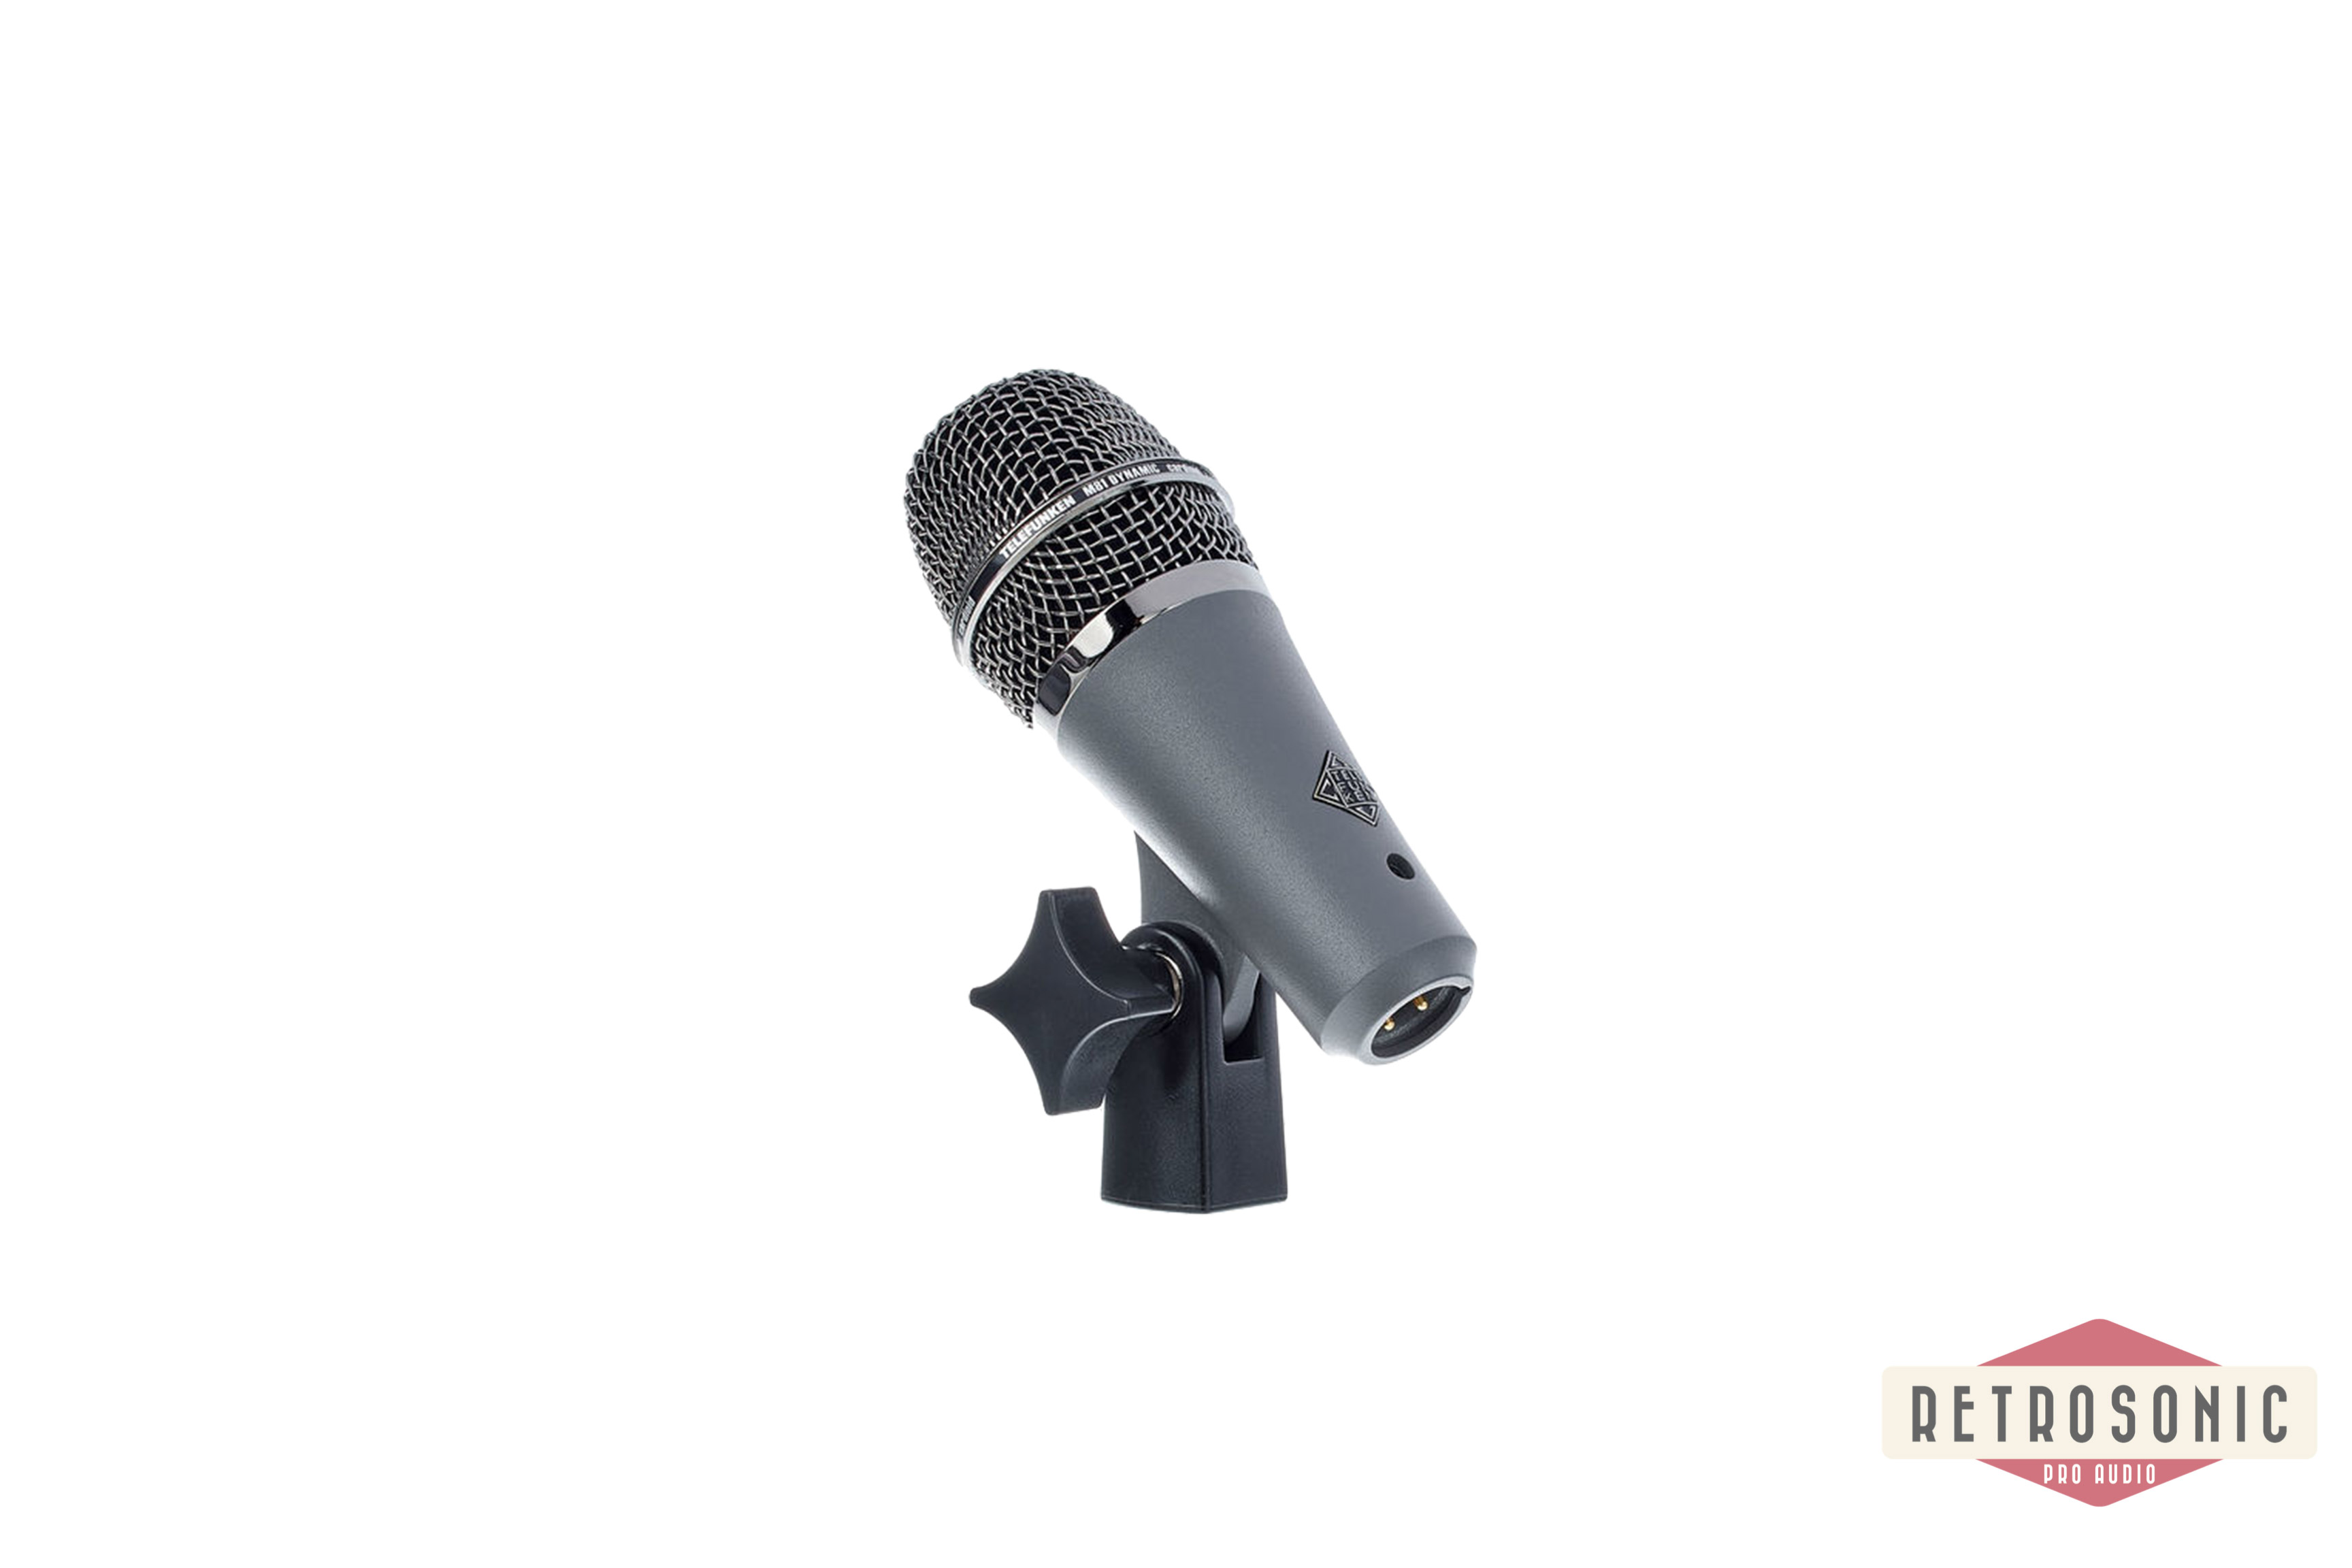 Telefunken M81SH Lower Profile Dynamic for Drums and Vocals.